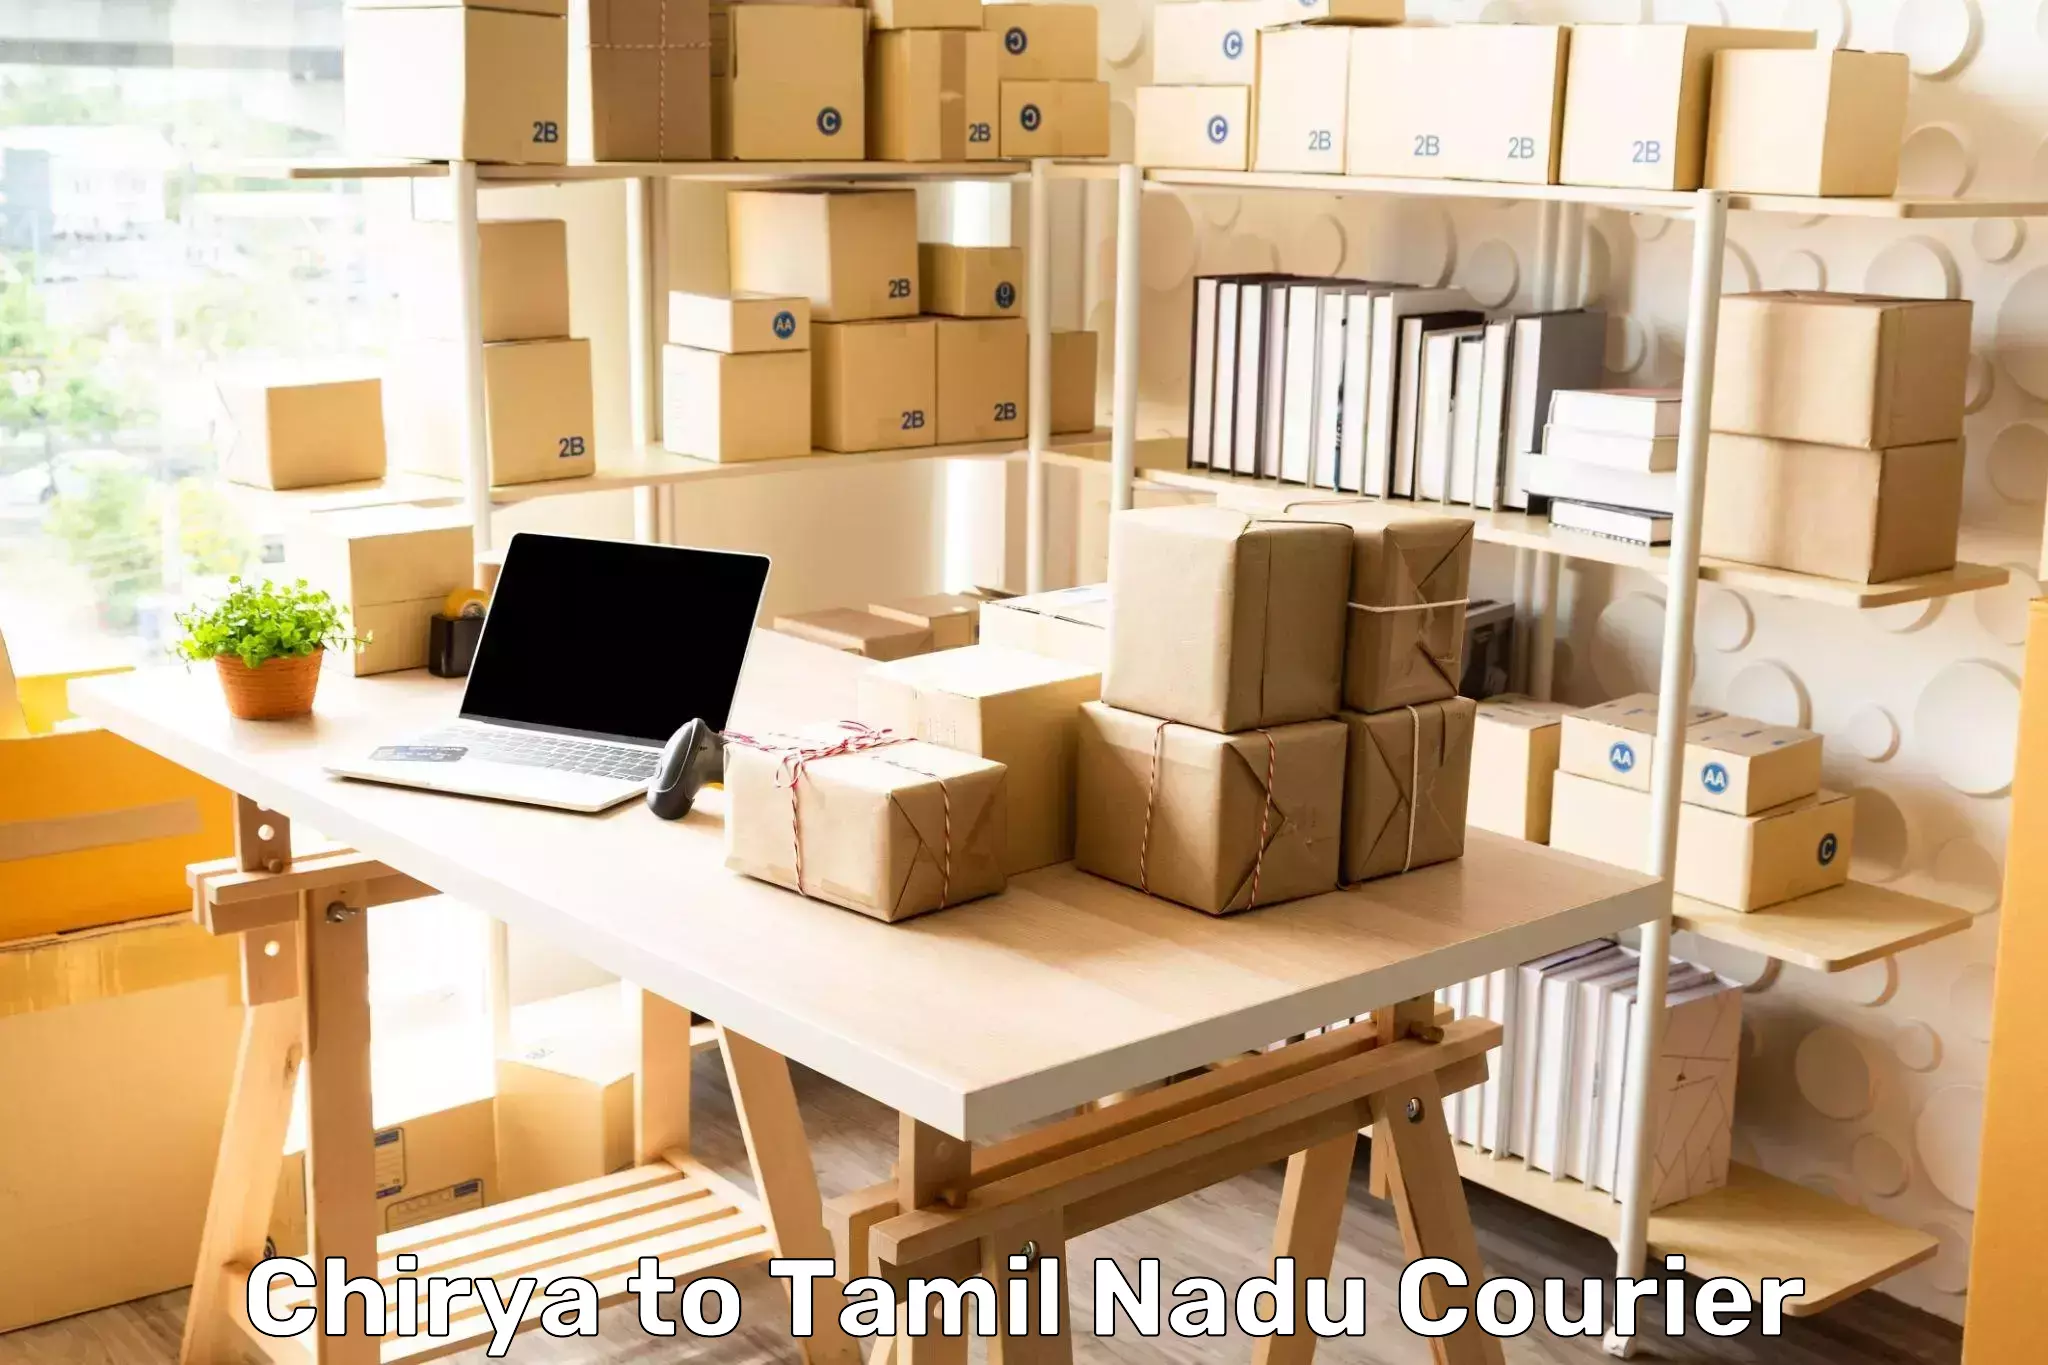 Multi-service courier options Chirya to Coimbatore